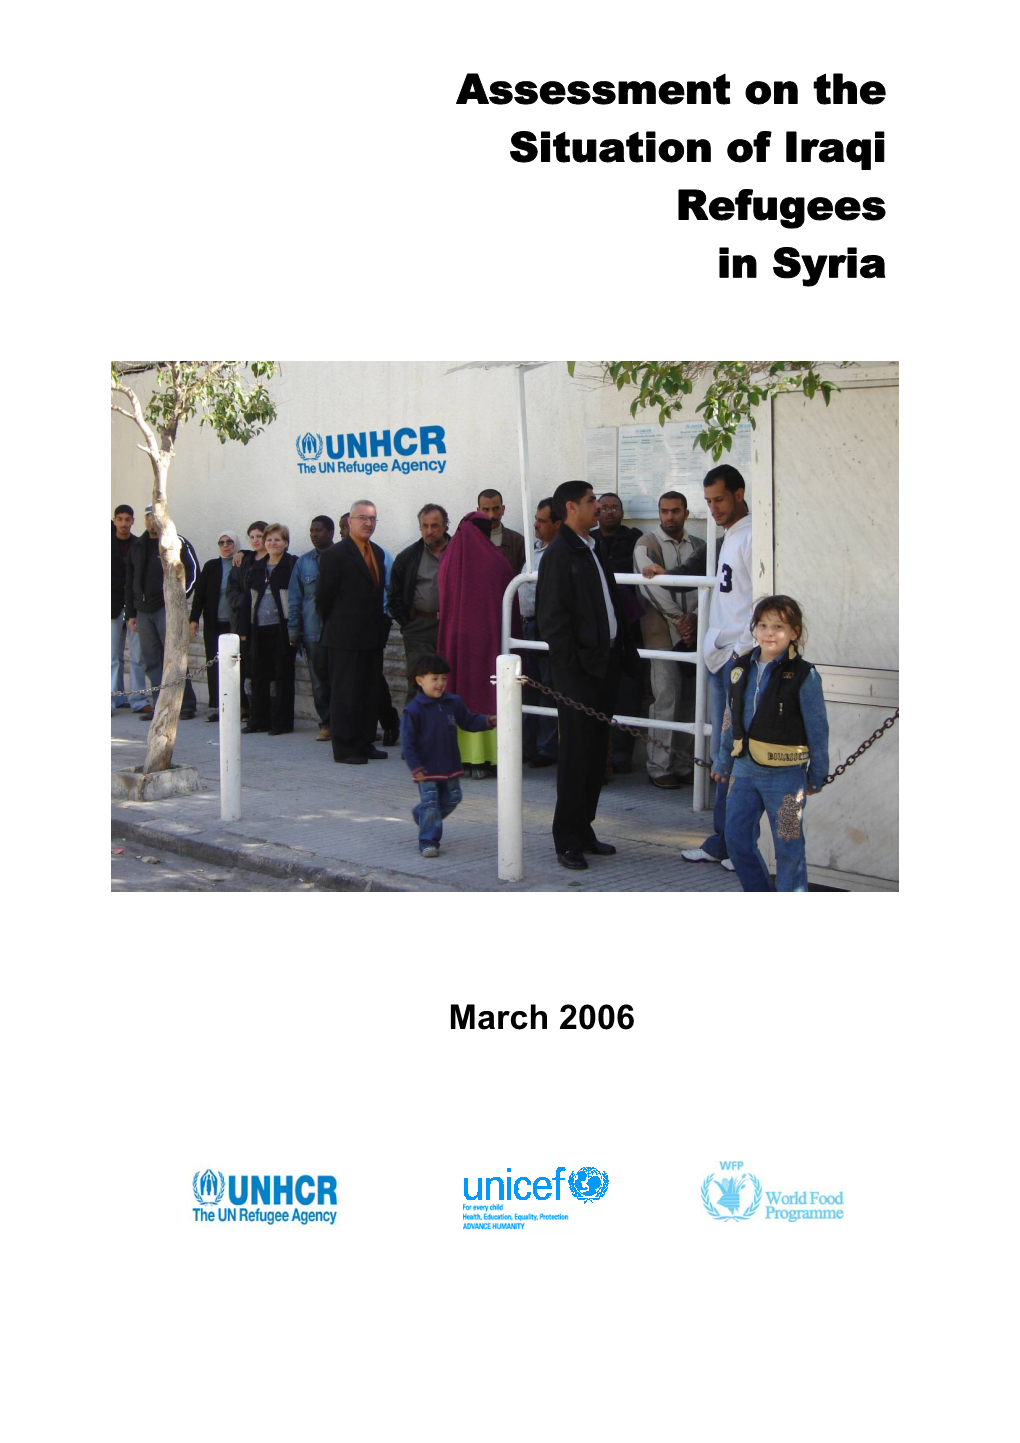 Assessment on the Situation of Iraqi Refugees in Syria